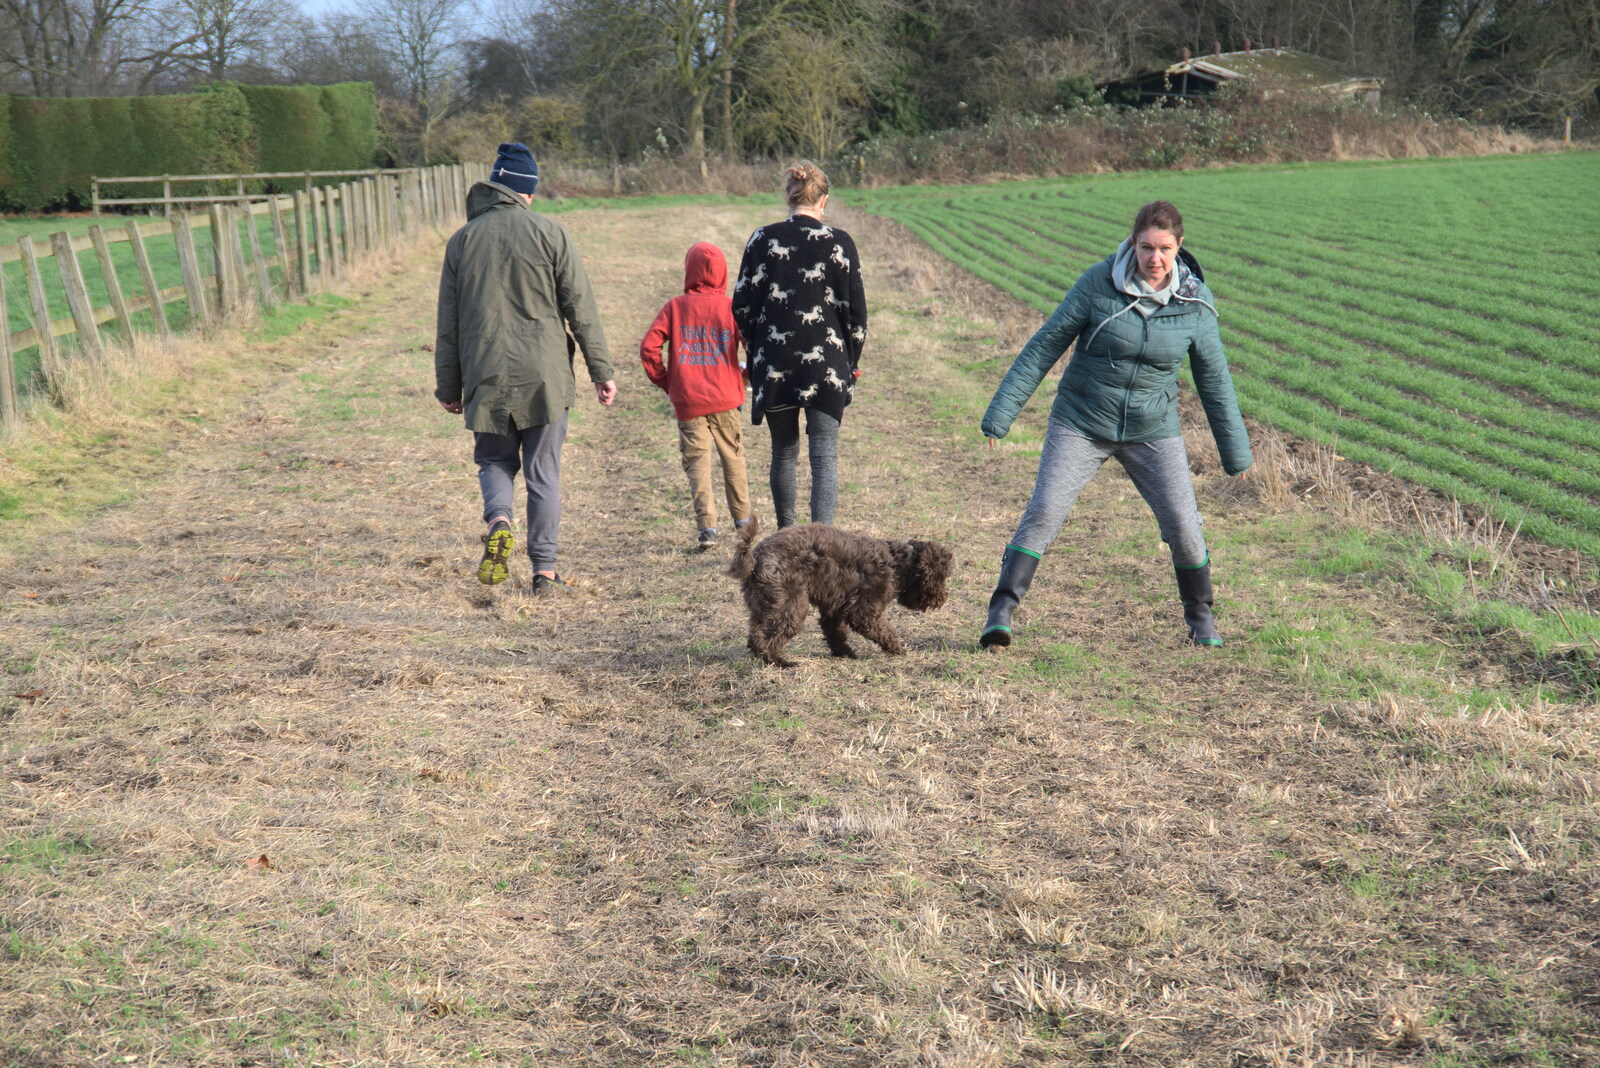 The crazy dog runs around from New Year's Day, Brome, Suffolk - 1st January 2022